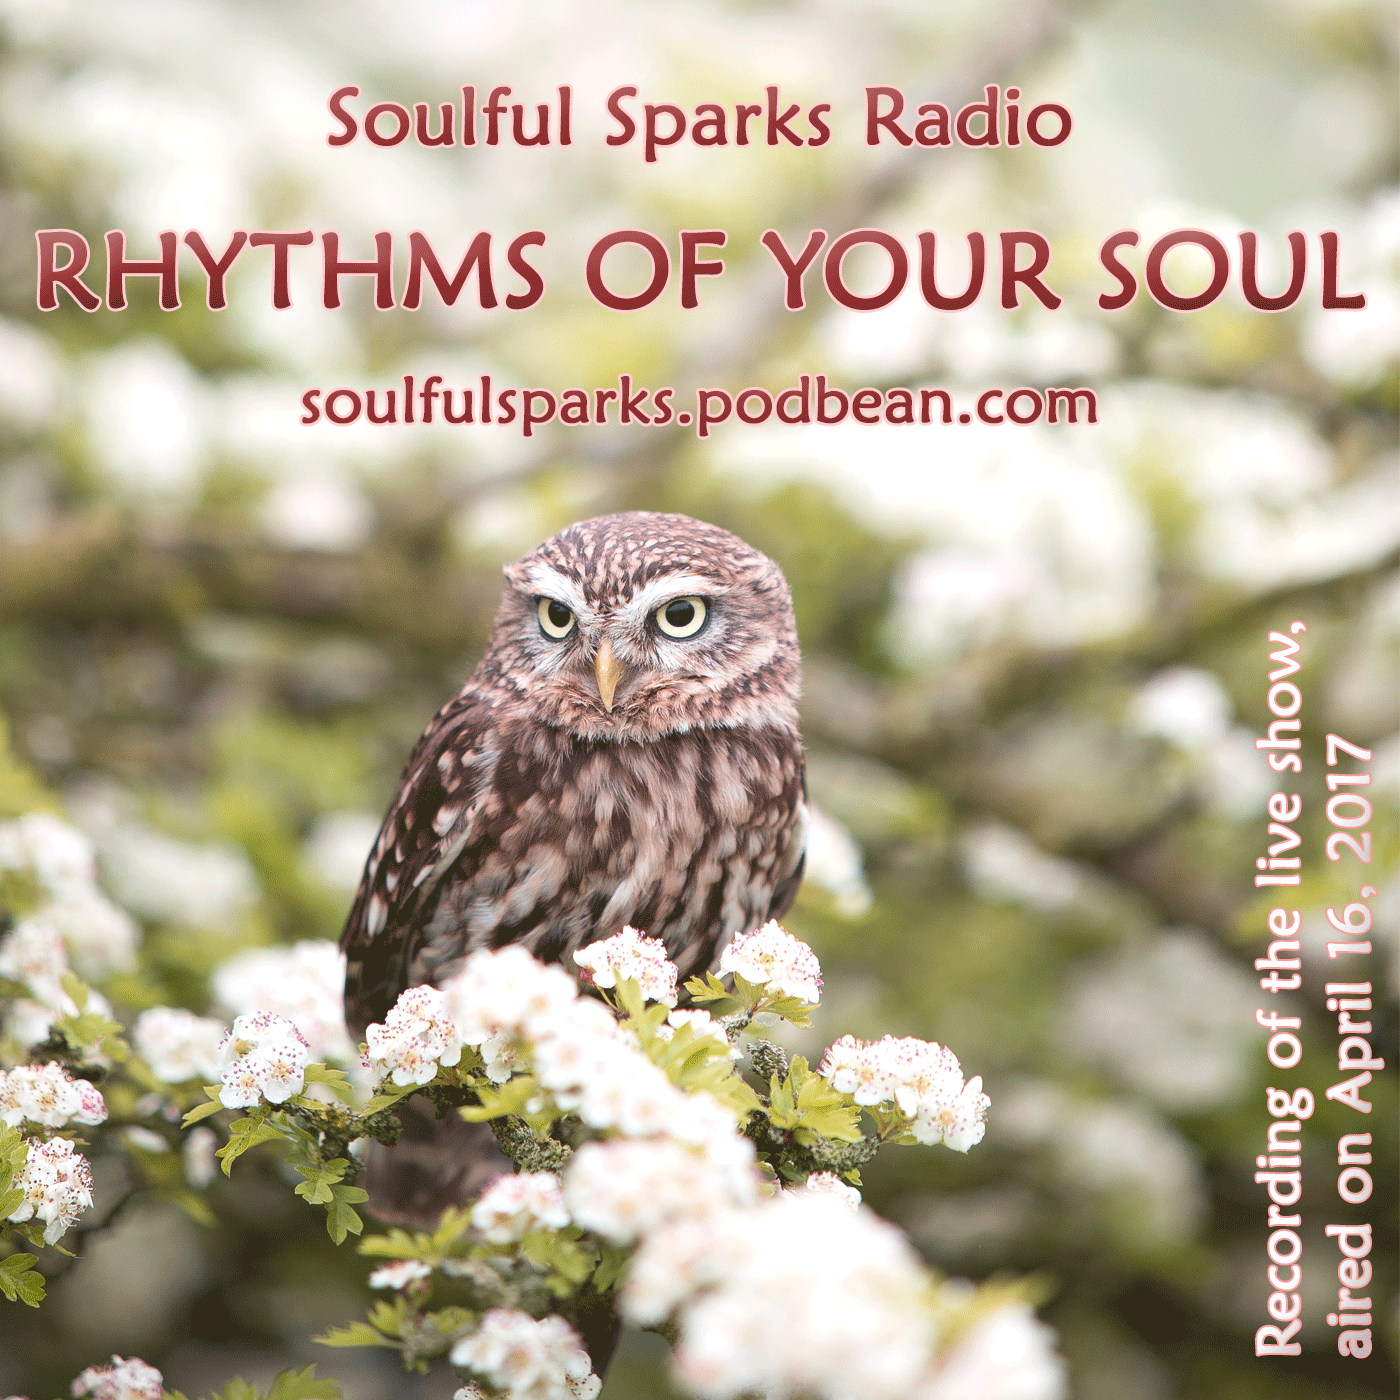 Find the Rhythms of Your Soul